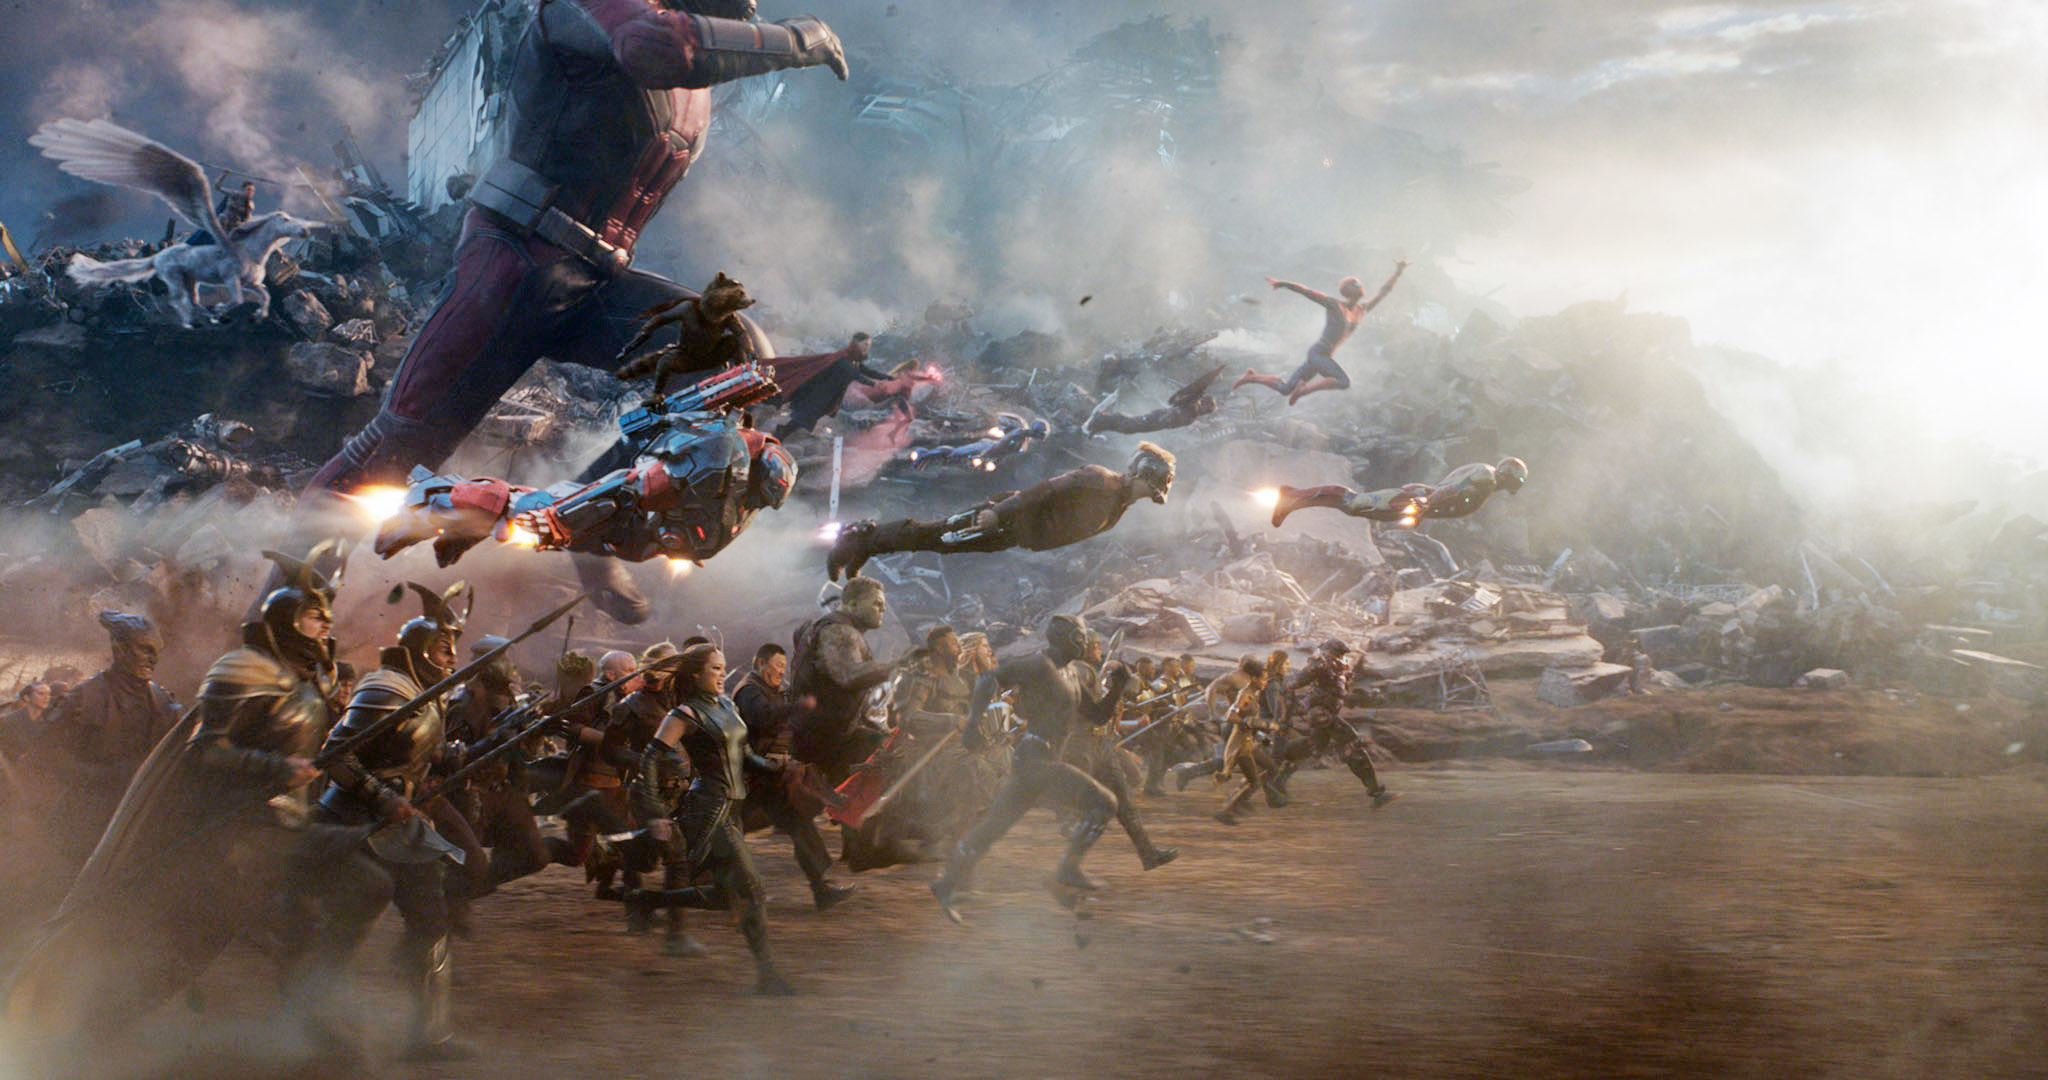 Battle scene with superheroes like Iron Man flying and ground troops advancing